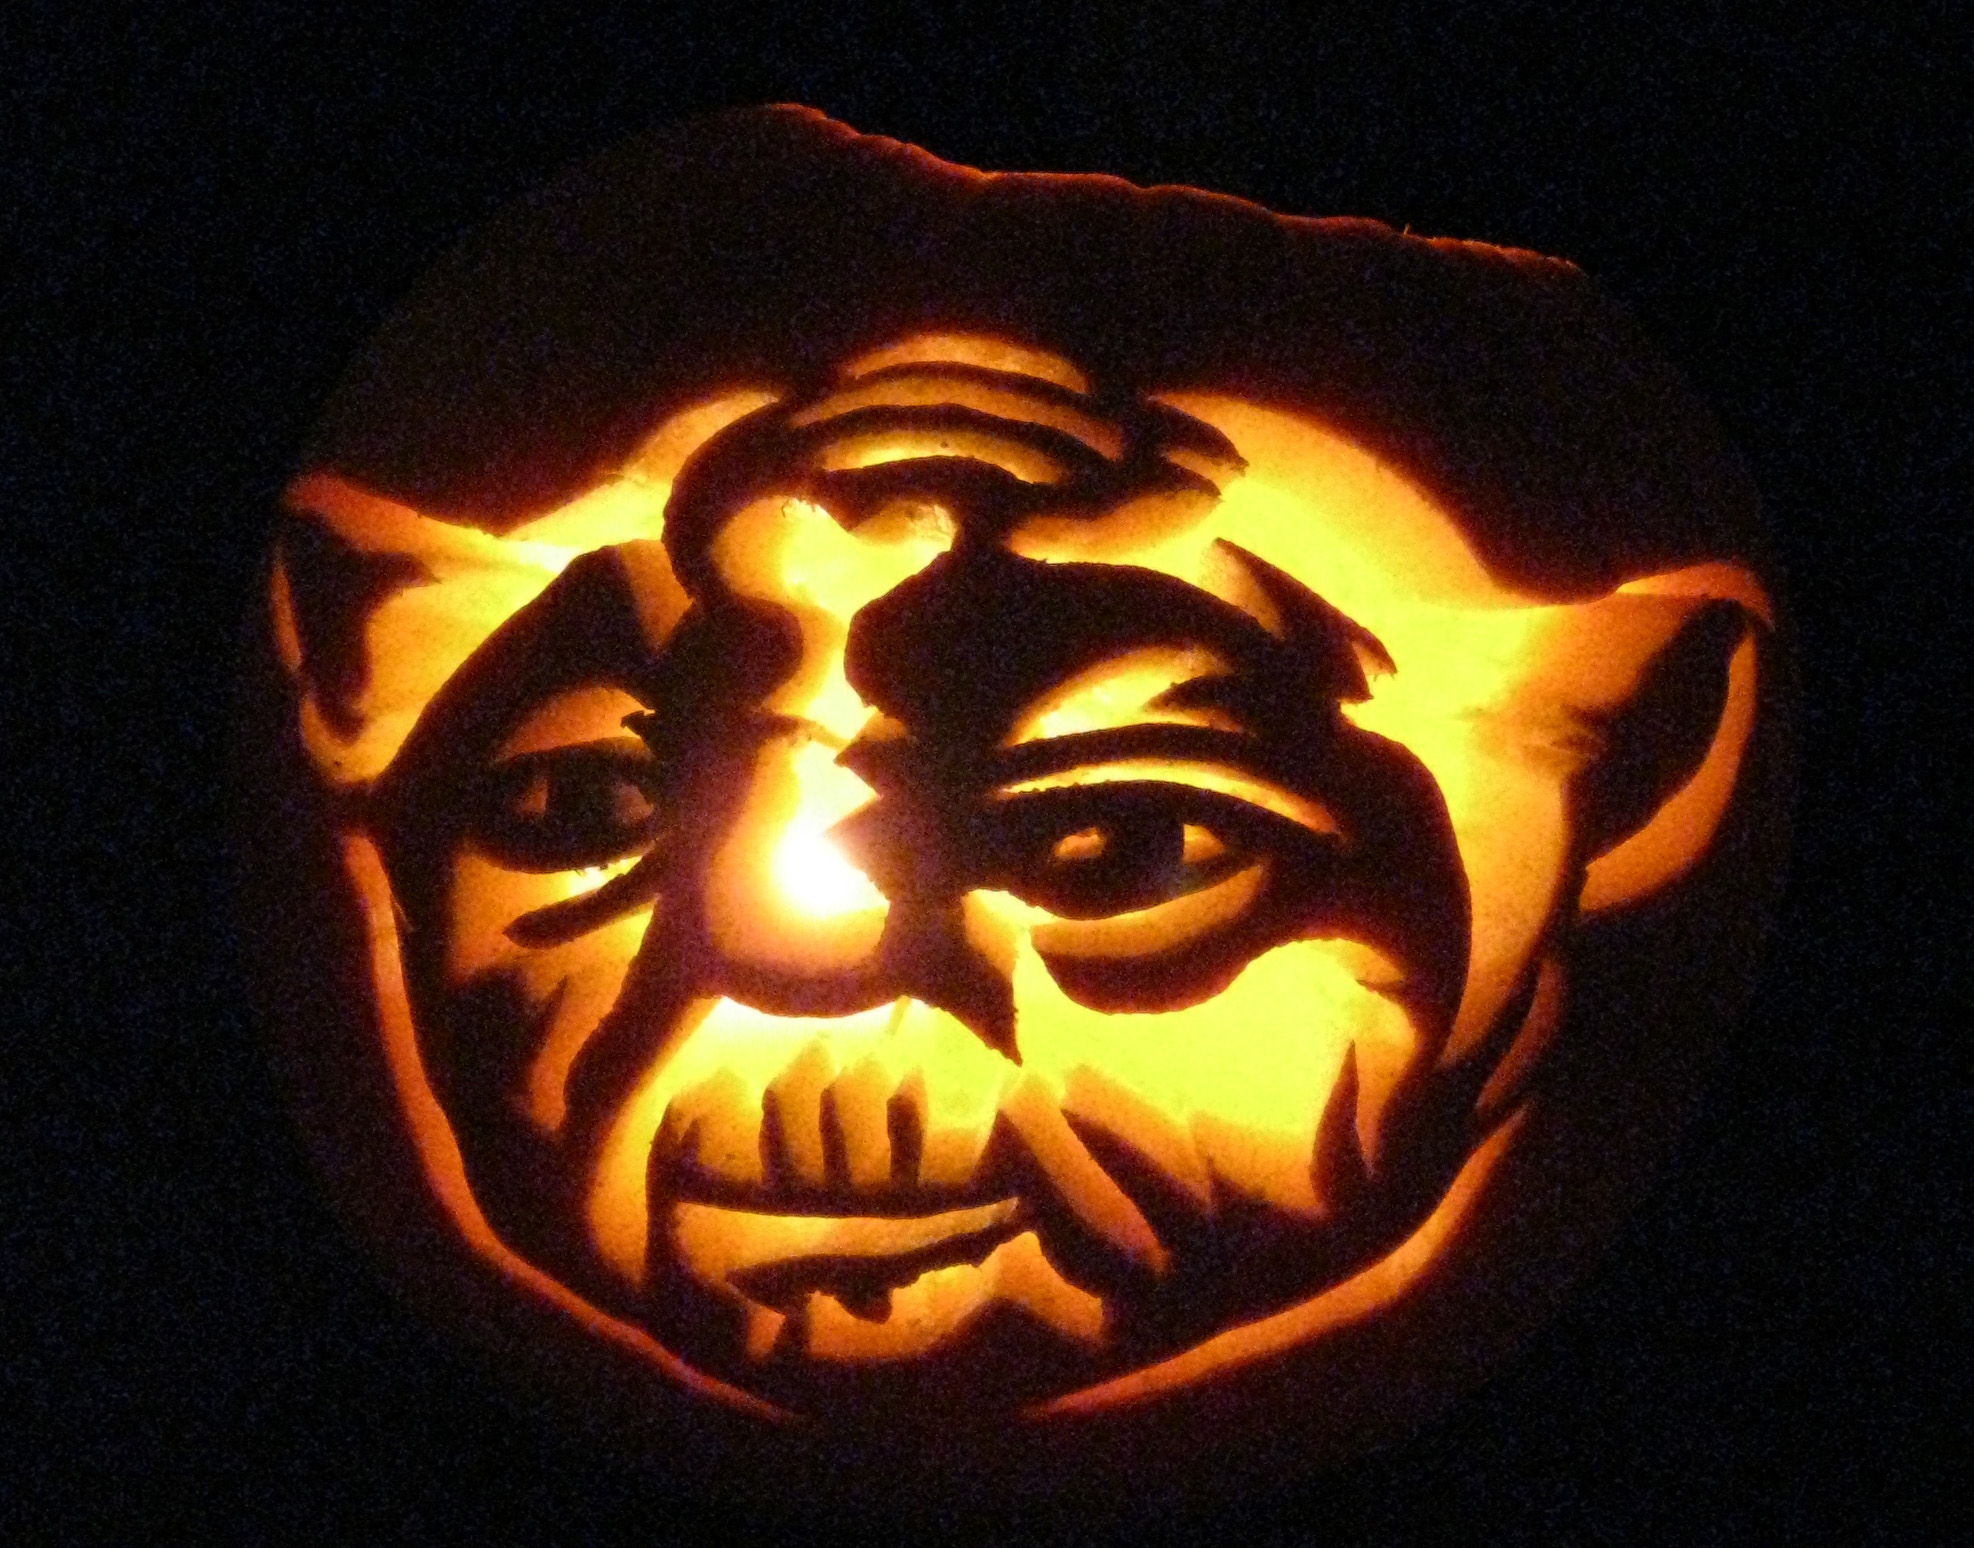 An amazing carved pumpkin of YODA from Star Wars